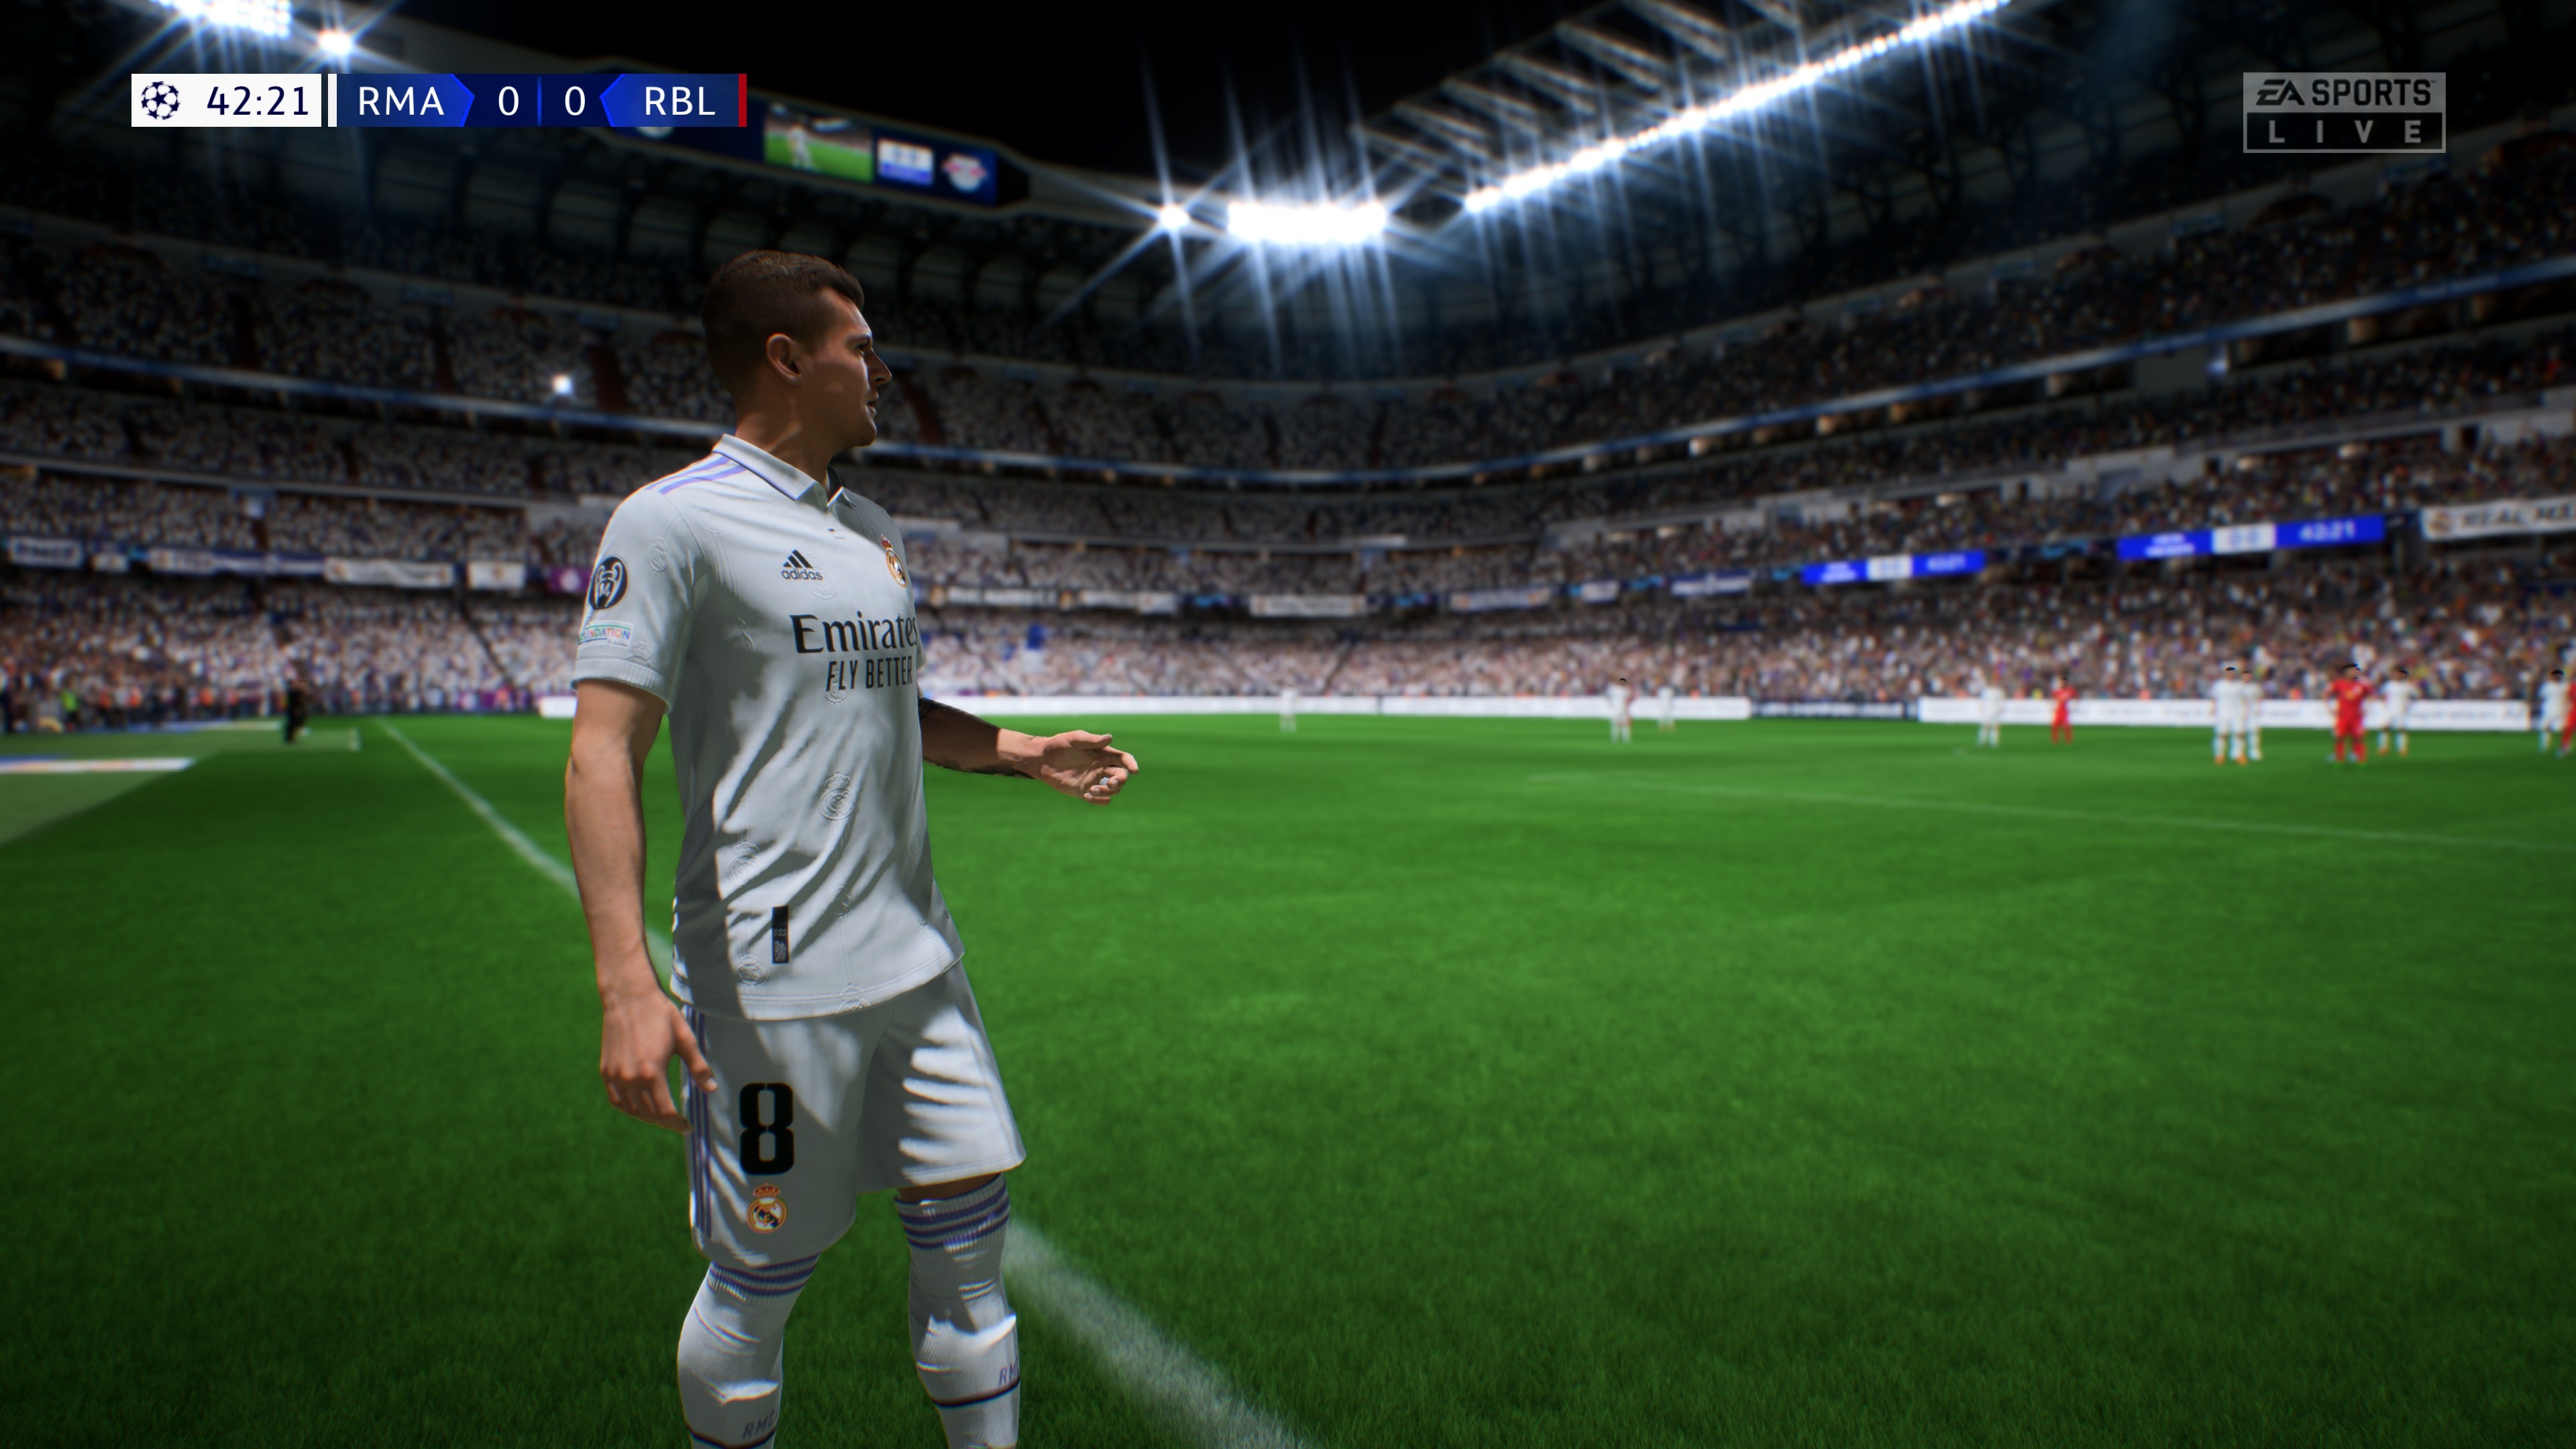 Re: Fifa 23 pc bad graphics (blurry and pixalated) and stuttering